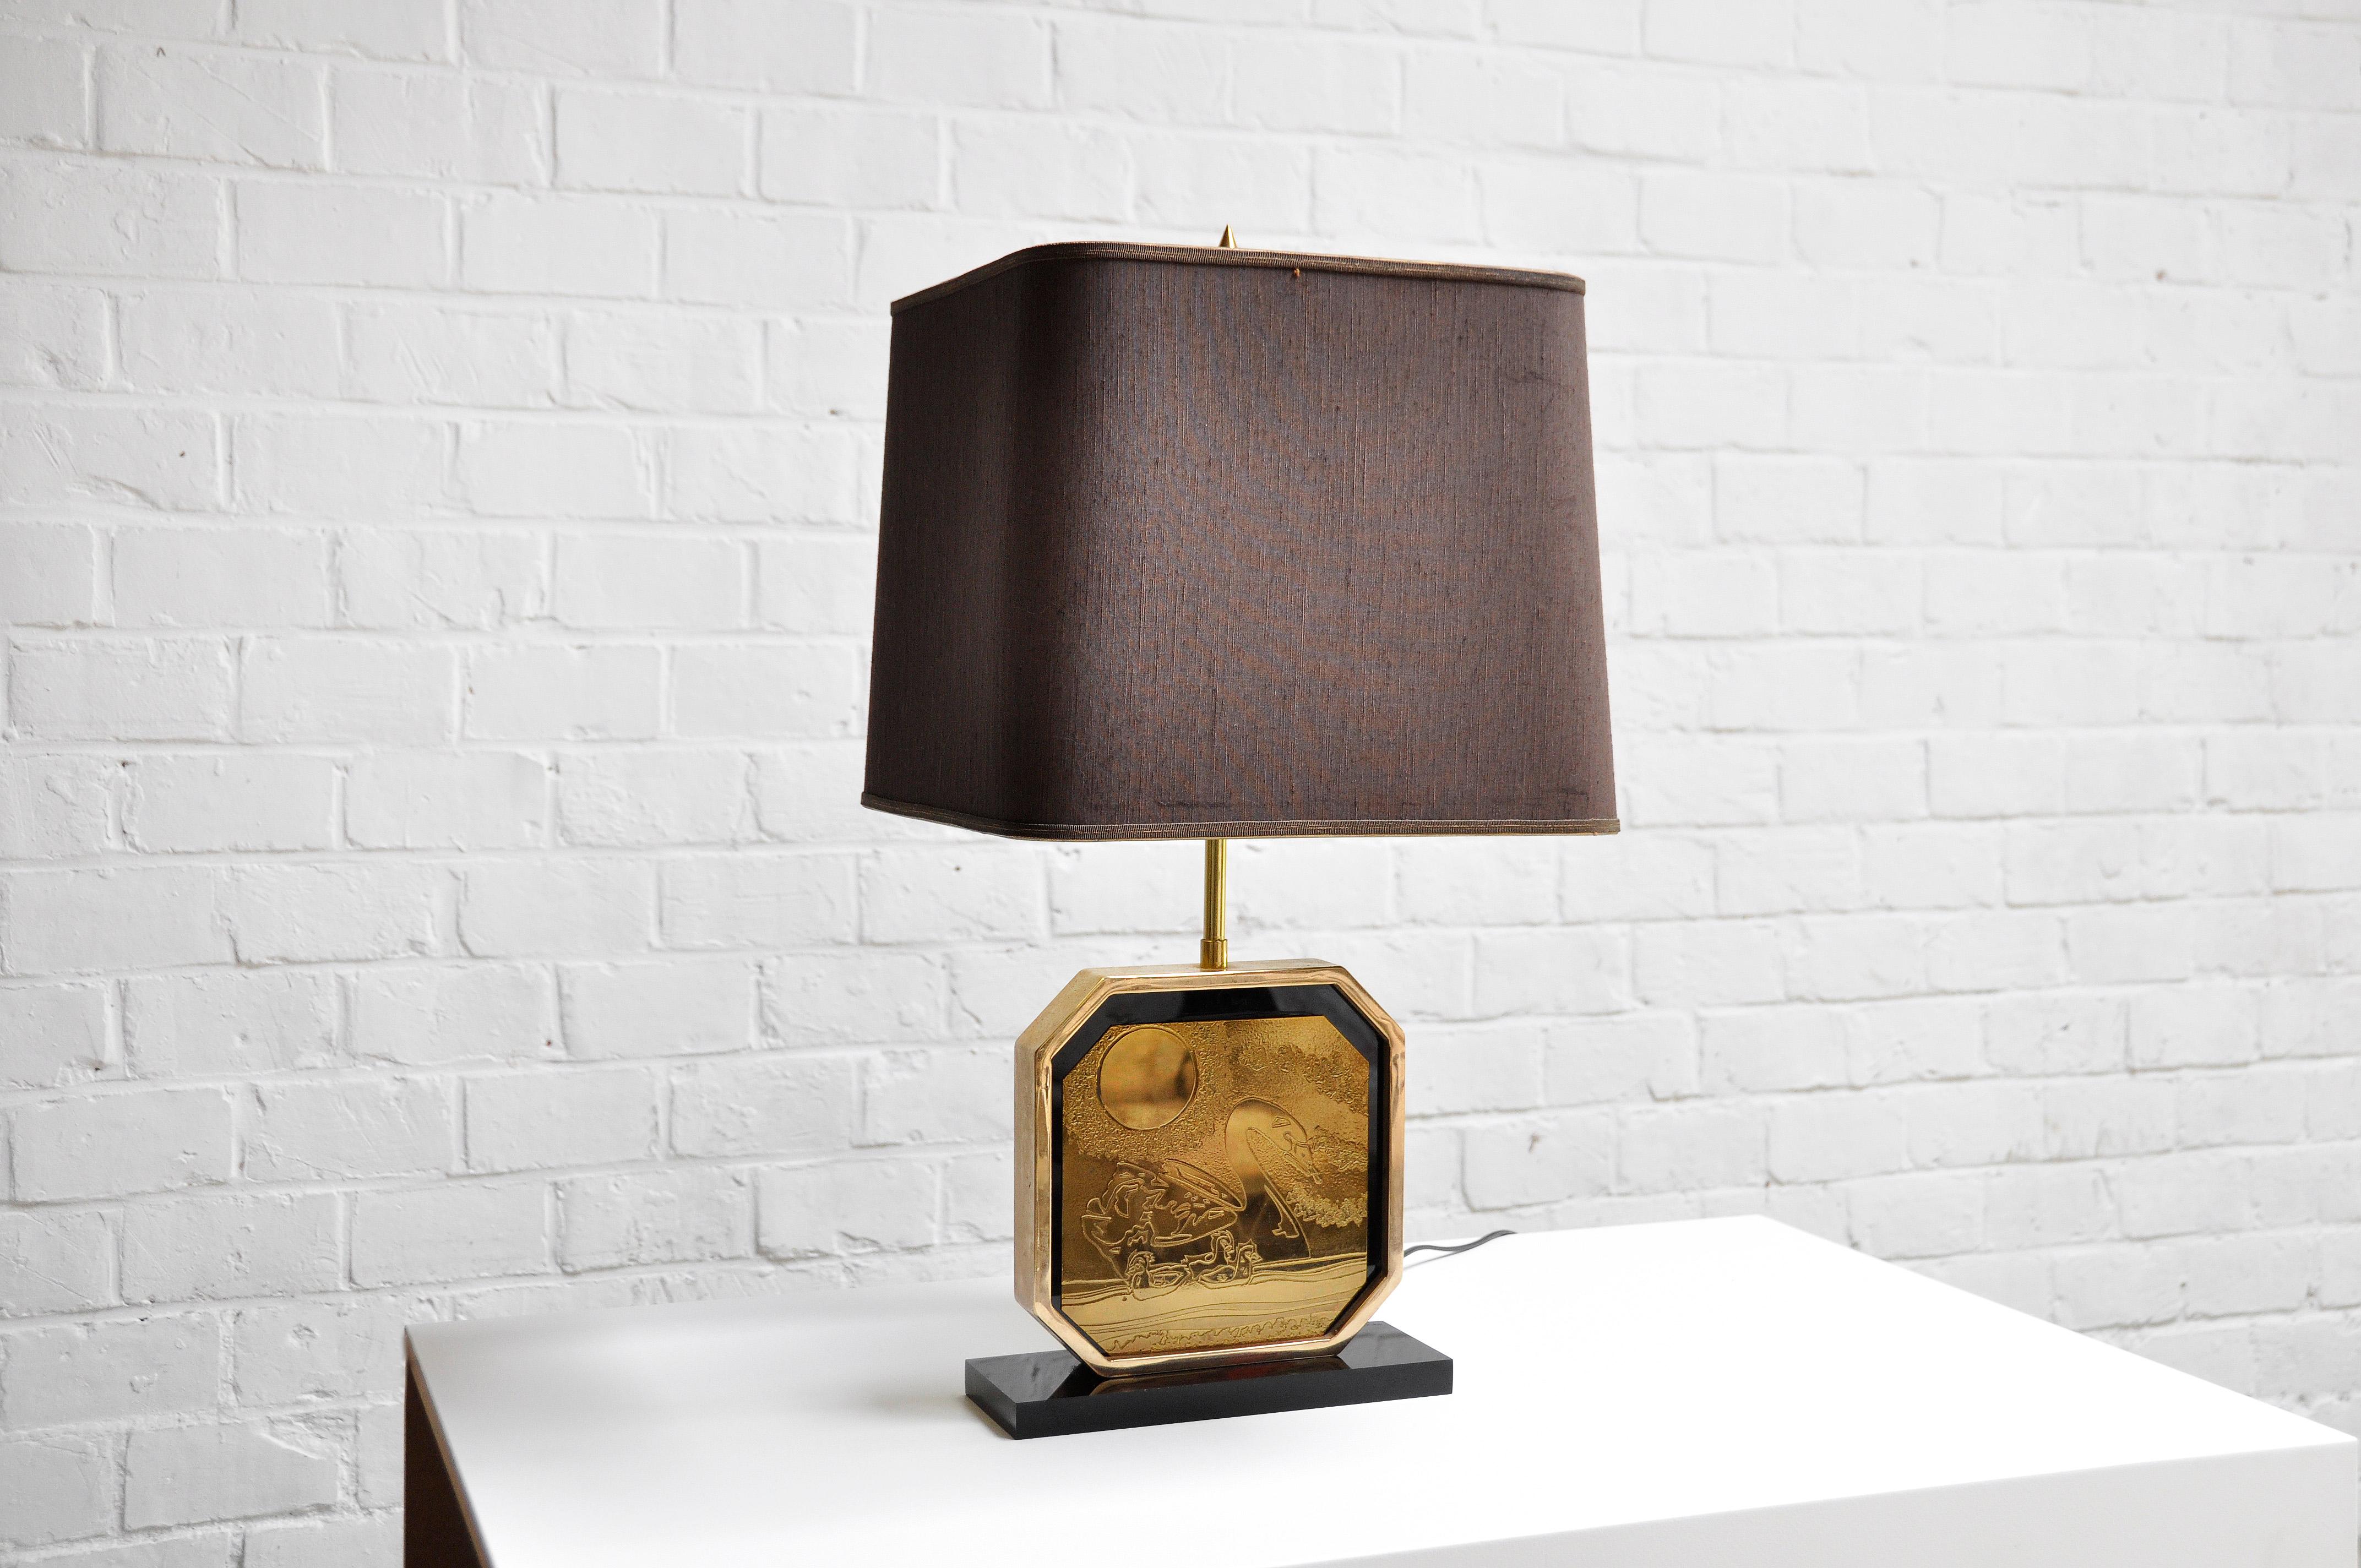 Brutalist table lamp designed by Georges Mathias in the 1970’s. Features a brass frame with a 23 carat handmade etched gold-plated front with a handmade design typical of Mathias' work. The lamp is signed and numbered 123 out of 125. It comes with